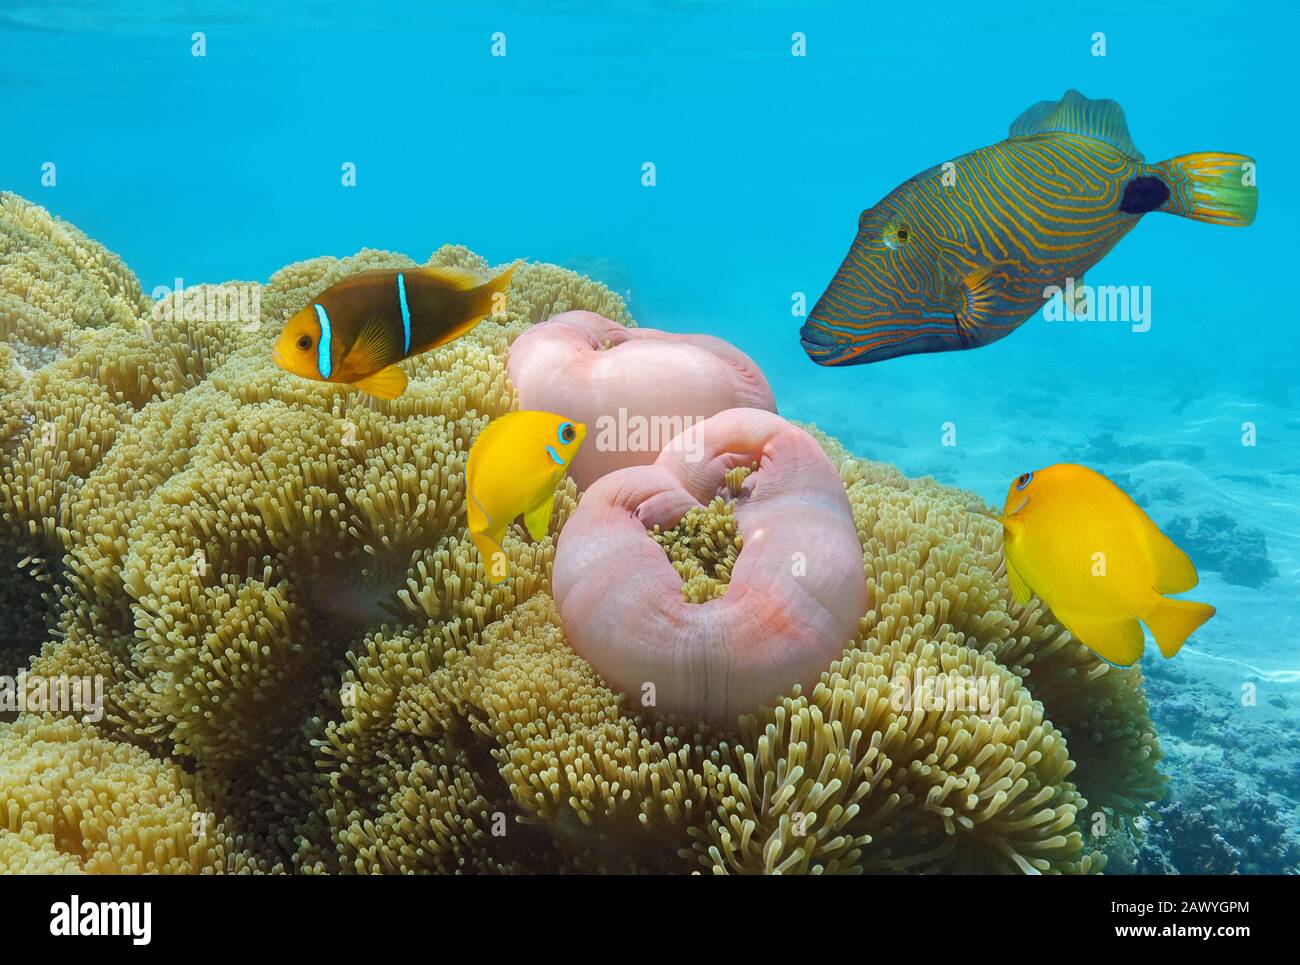 Colorful tropical fish with sea anemones underwater in Pacific ocean, French Polynesia Stock Photo